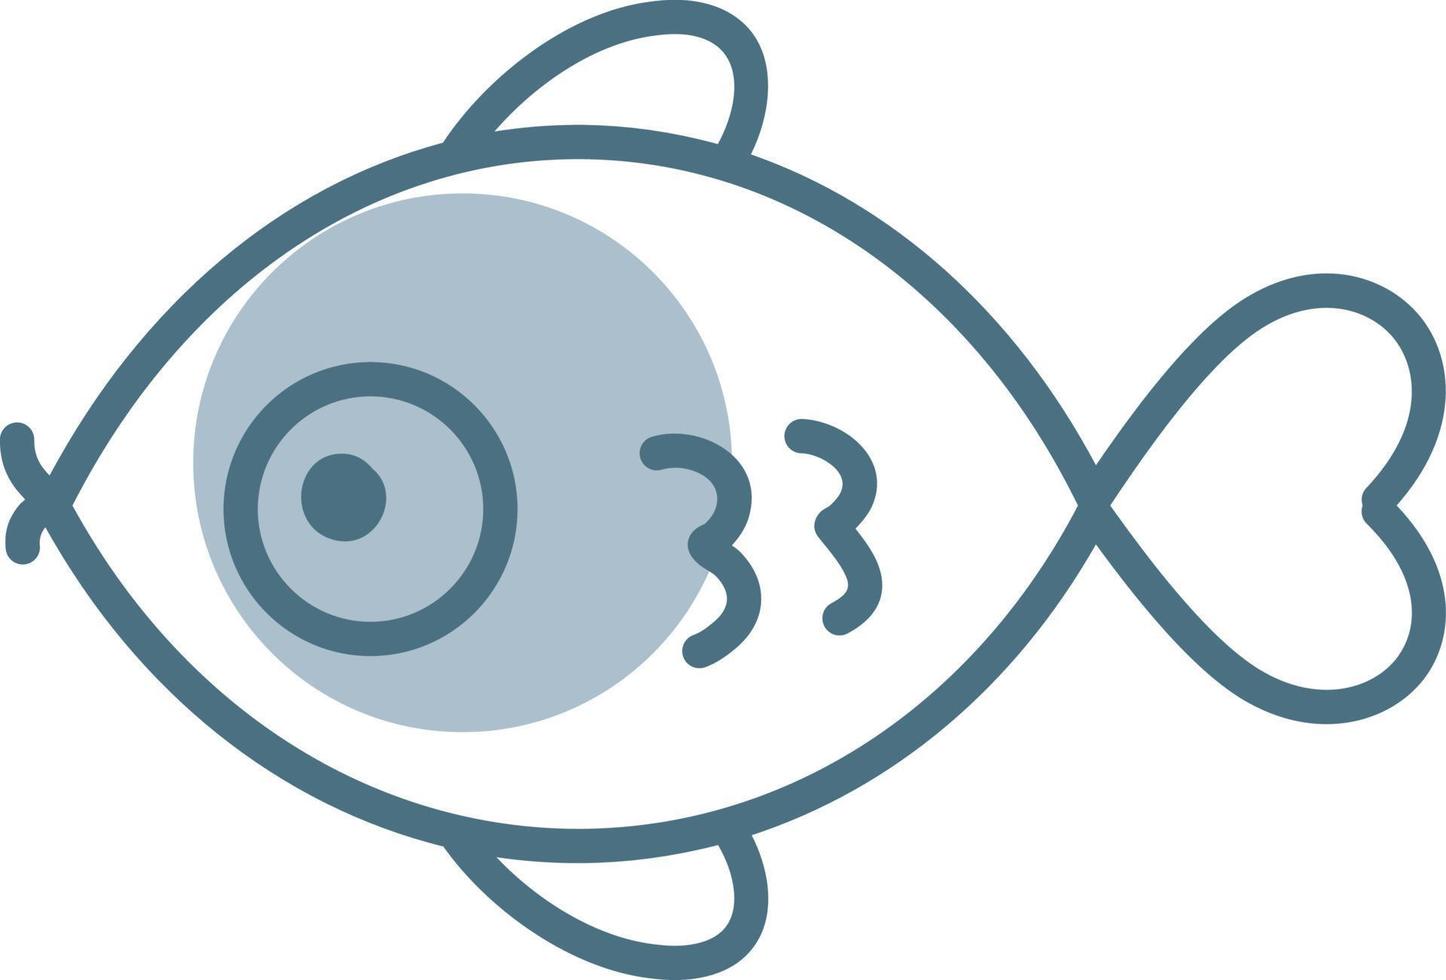 Blue fish, illustration, vector on a white background.